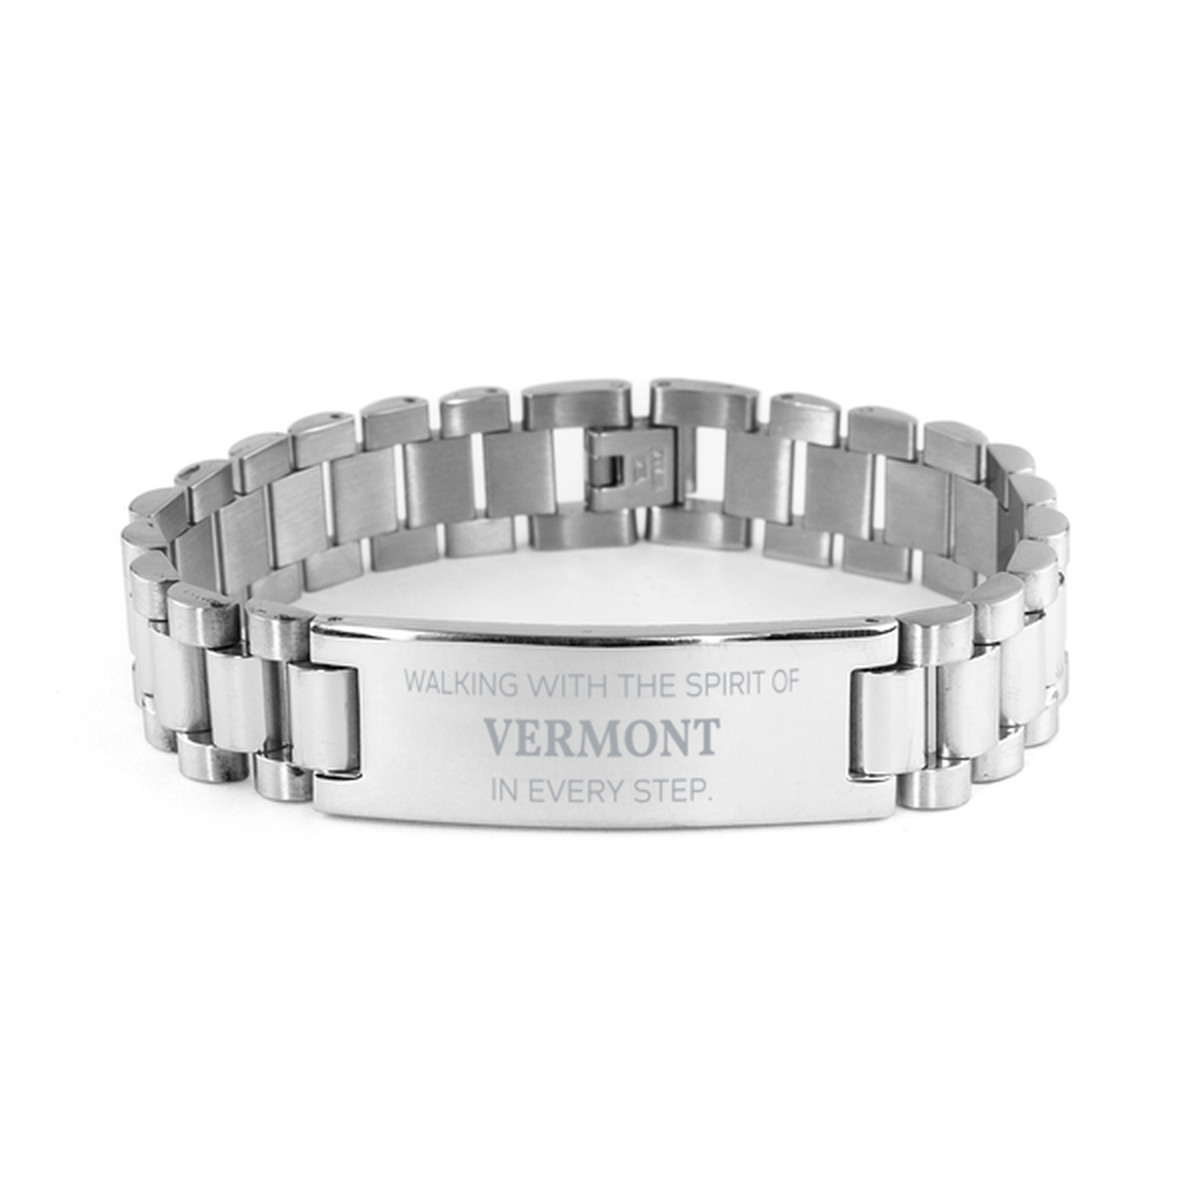 Vermont Gifts, Walking with the spirit, Love Vermont Birthday Christmas Ladder Stainless Steel Bracelet For Vermont People, Men, Women, Friends